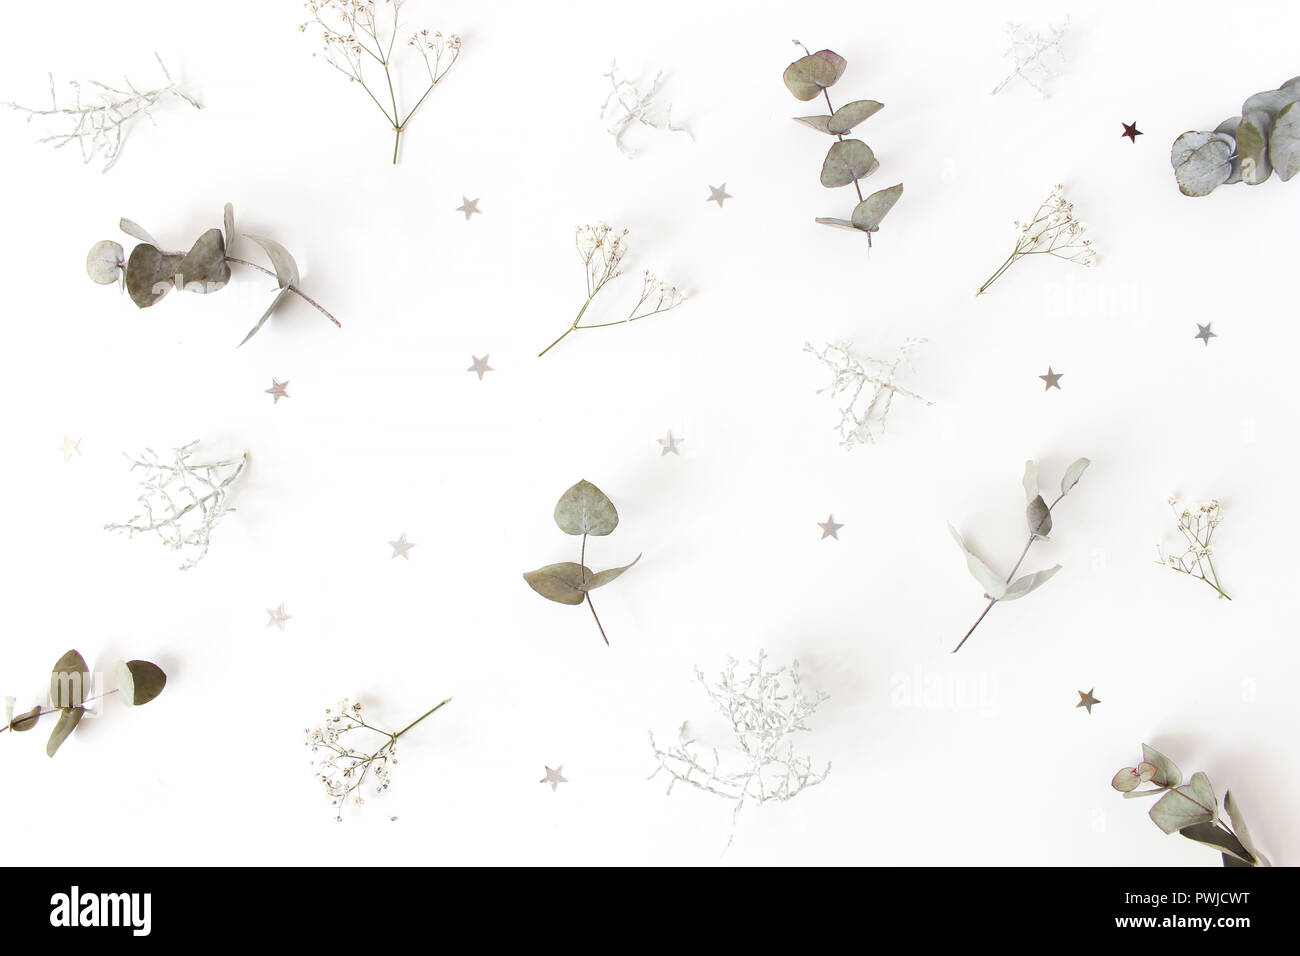 Christmas floral pattern. Winter composition of eucalyptus tree branches, baby's breath flowers, Calocephalus brownii and silver confetti stars on whi Stock Photo